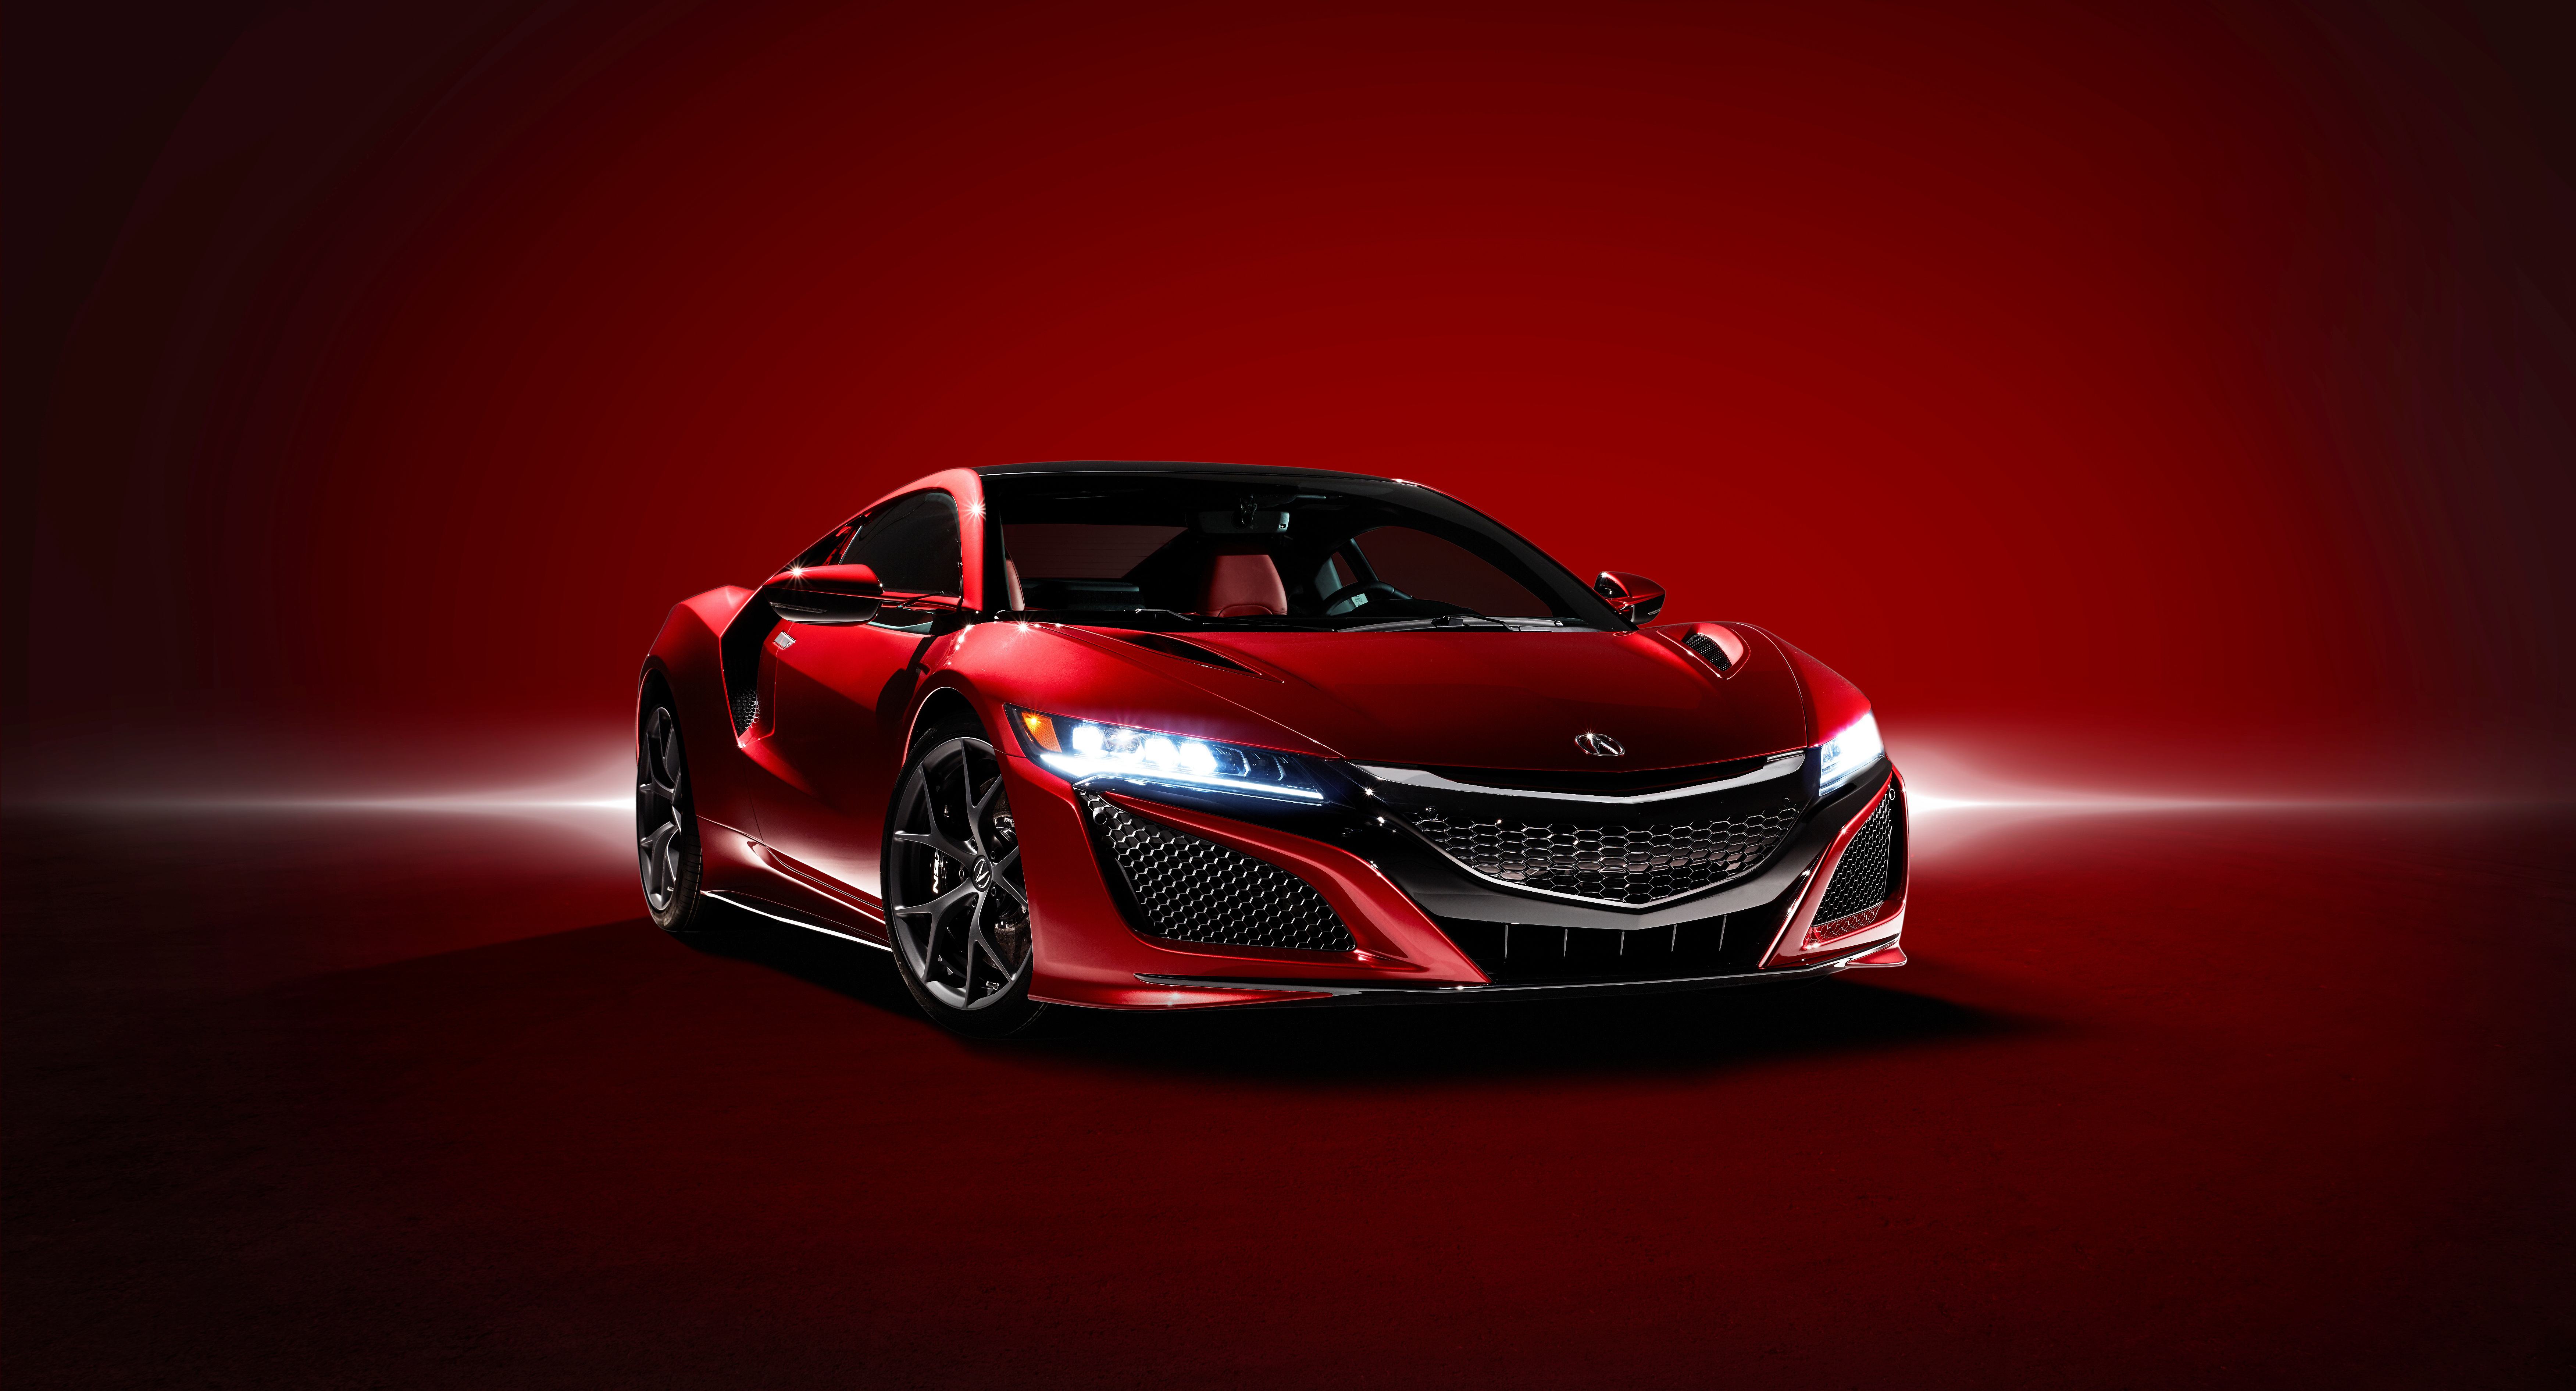 1080x19 Acura Nsx 8k New Iphone 7 6s 6 Plus Pixel Xl One Plus 3 3t 5 Hd 4k Wallpapers Images Backgrounds Photos And Pictures